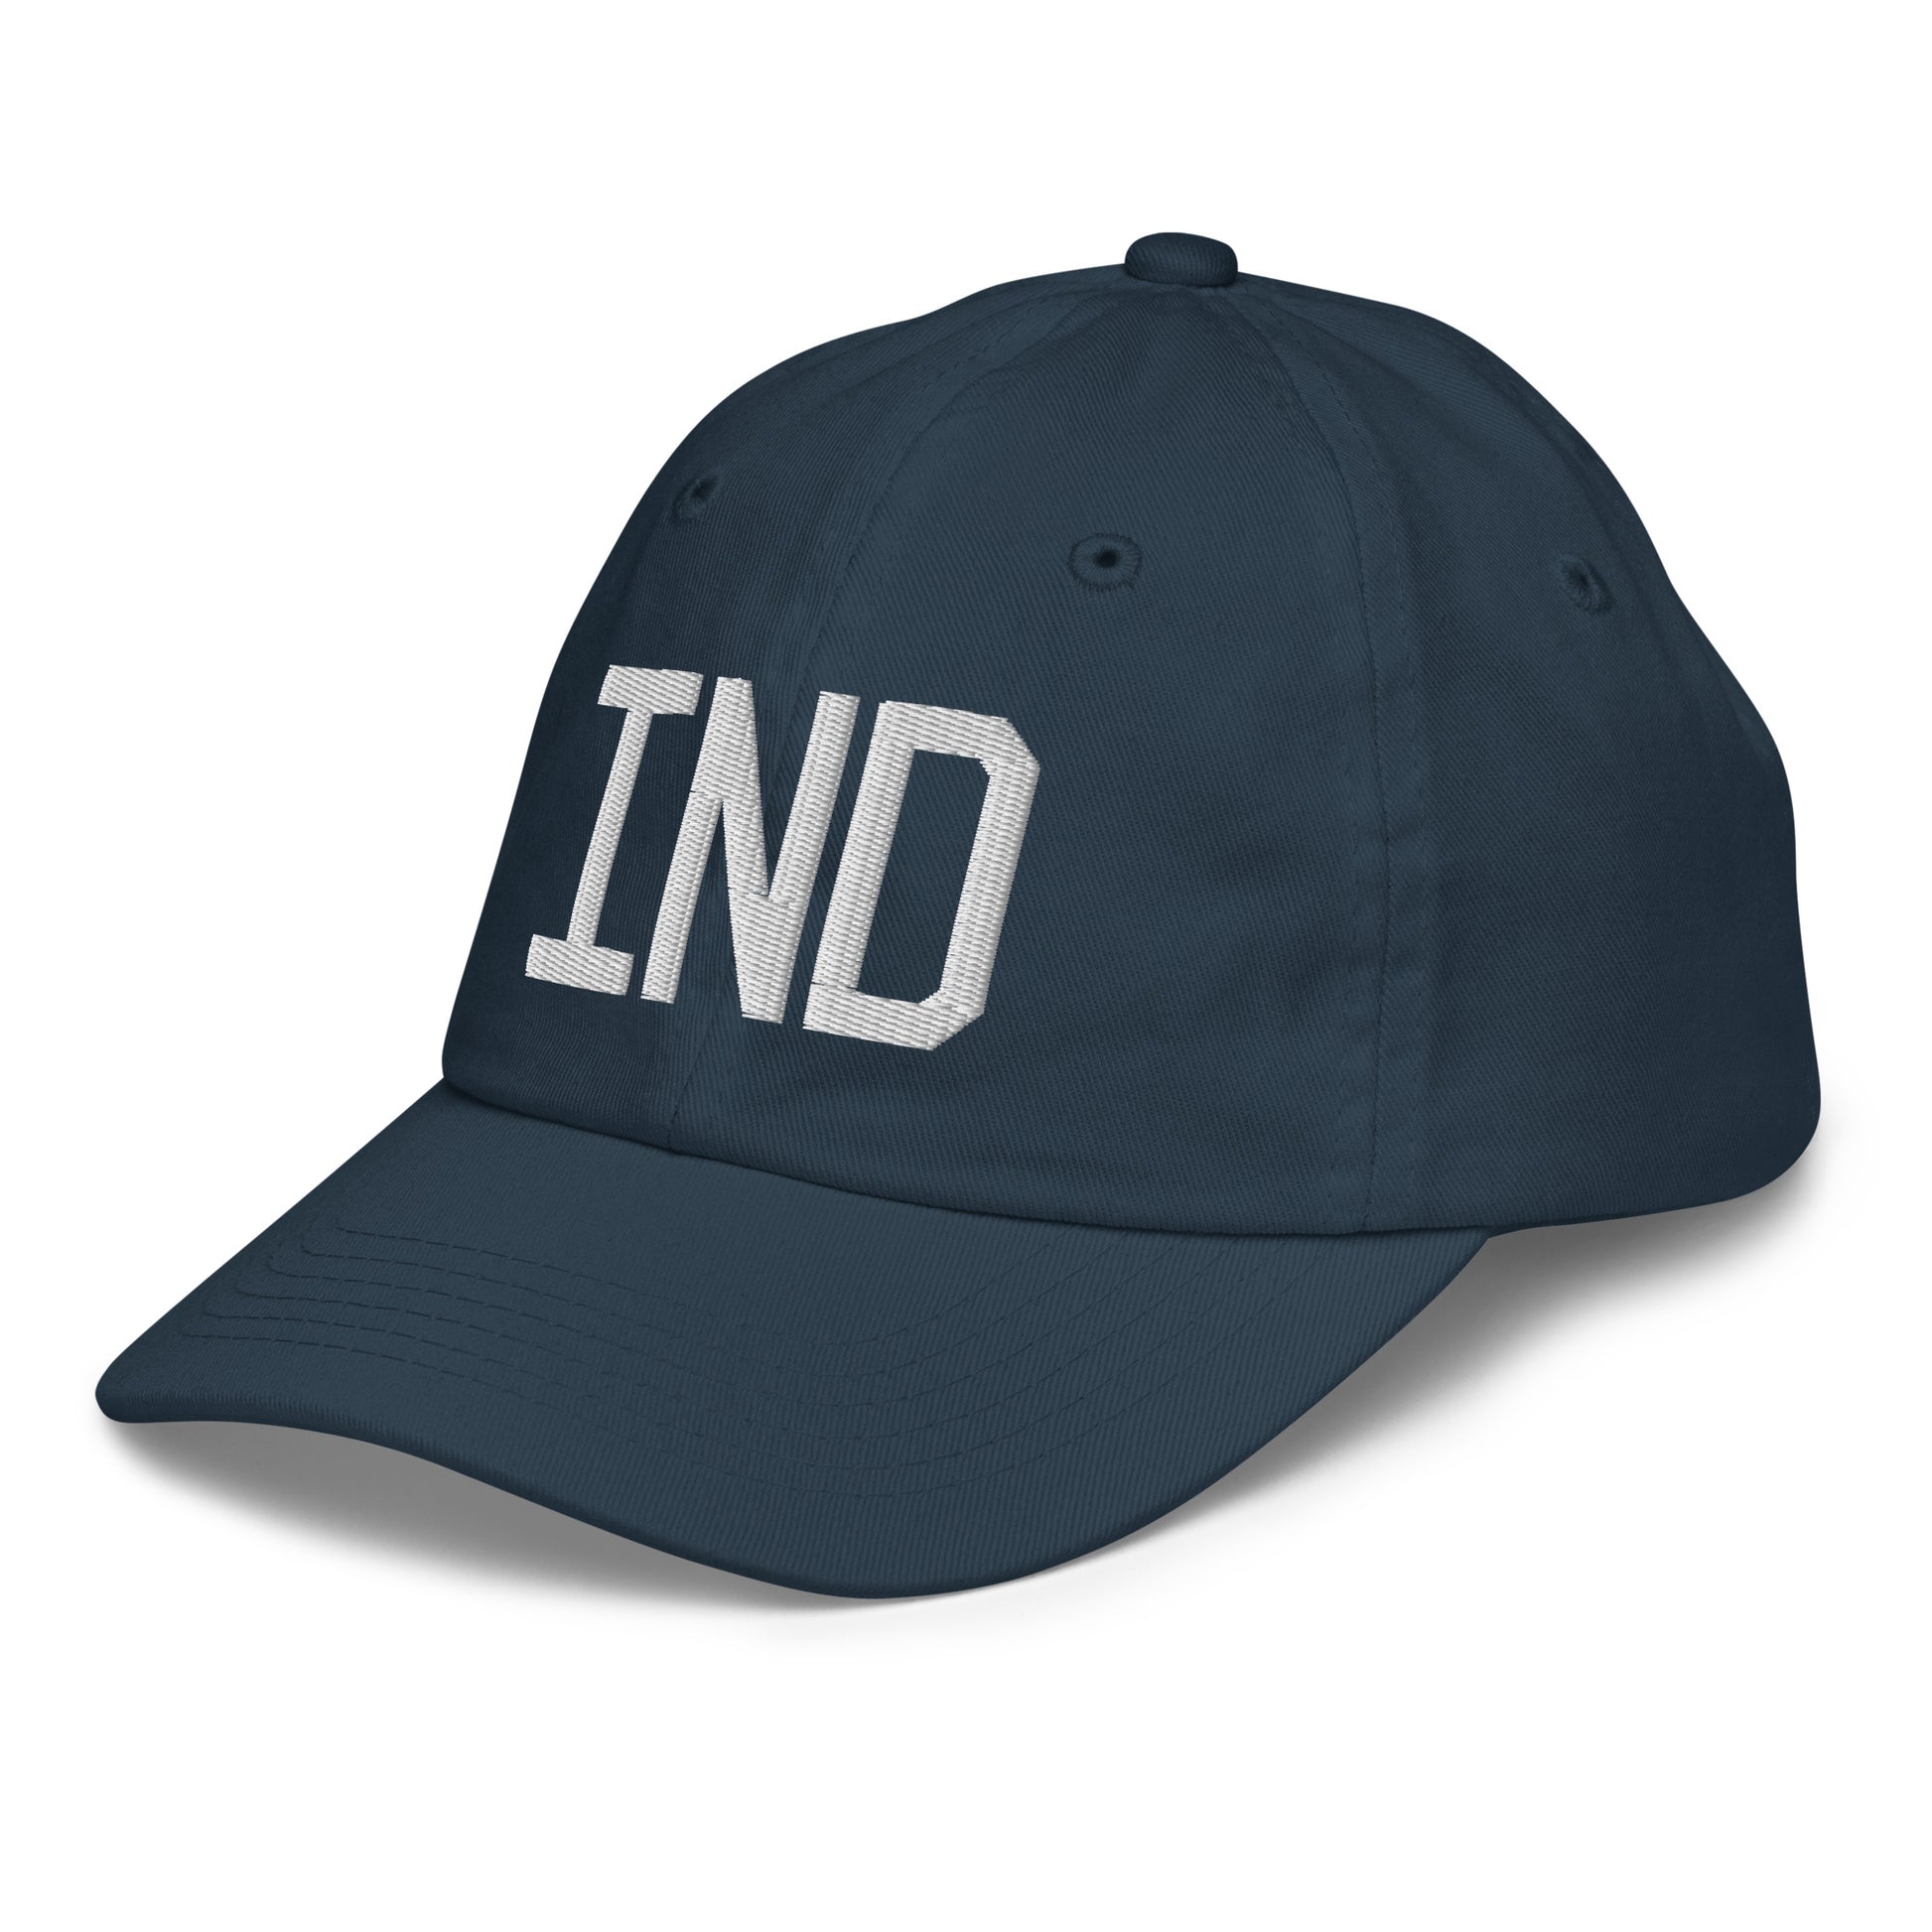 Airport Code Kid's Baseball Cap - White • IND Indianapolis • YHM Designs - Image 16